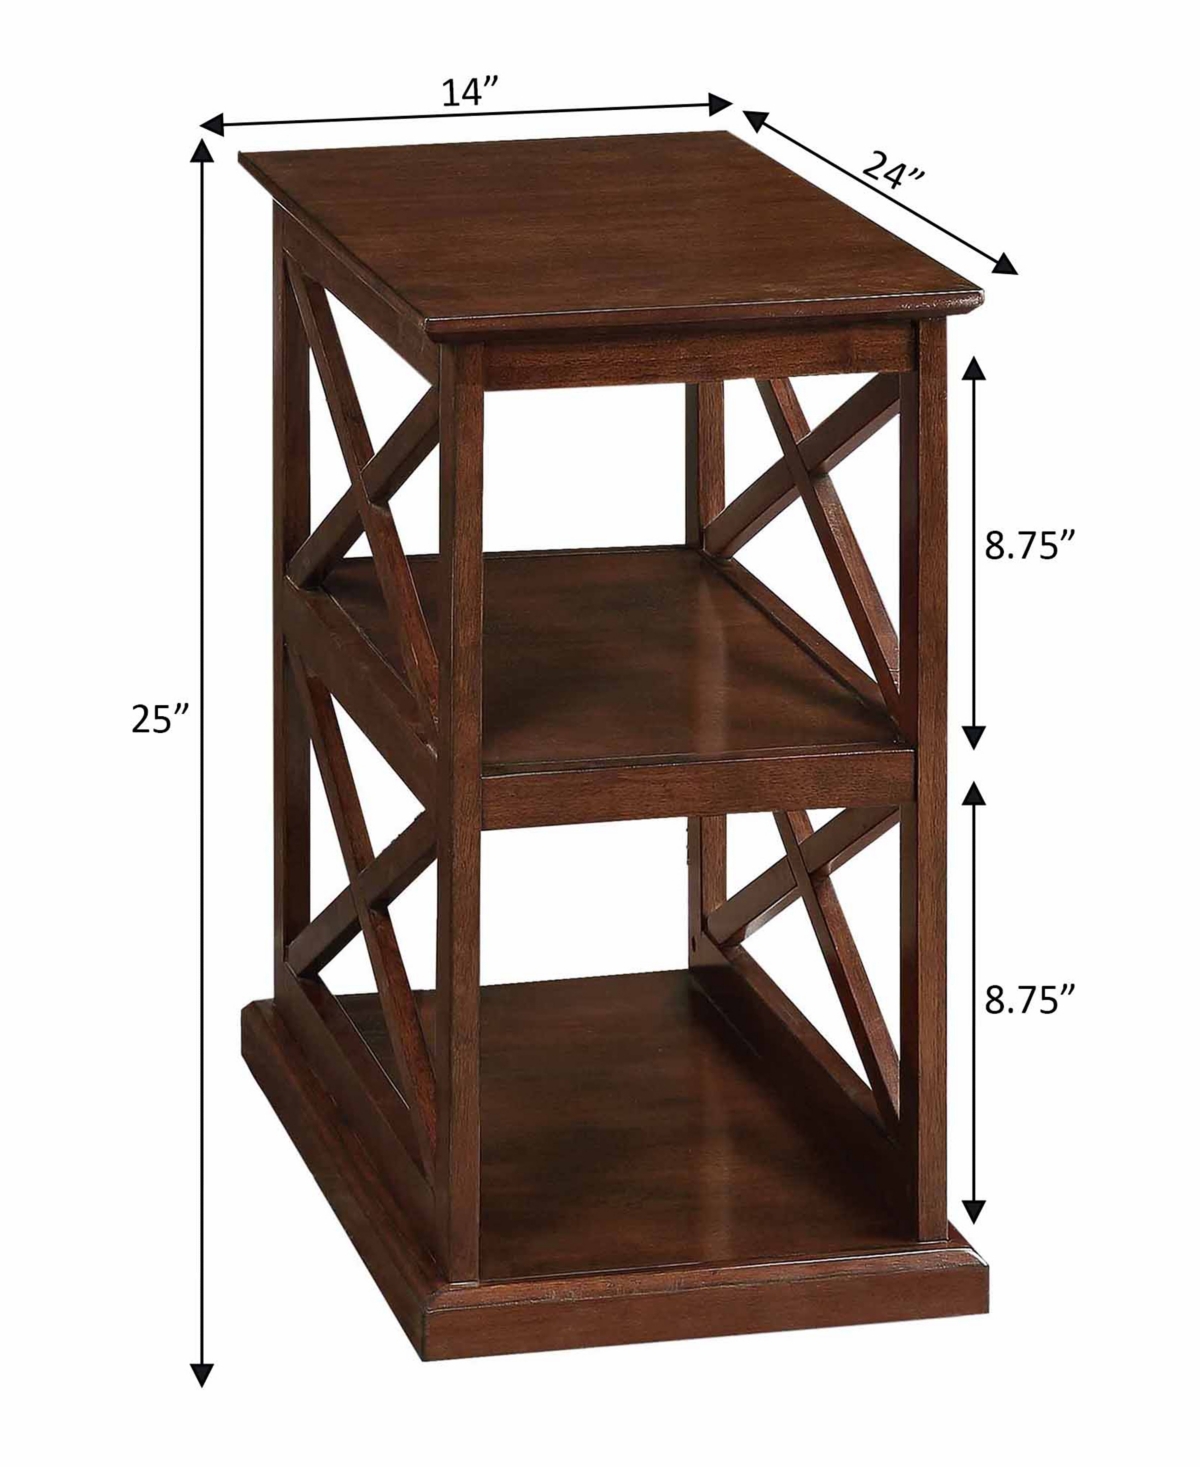 Shop Convenience Concepts 14" Rubber Wood Coventry Chairside End Table In Black